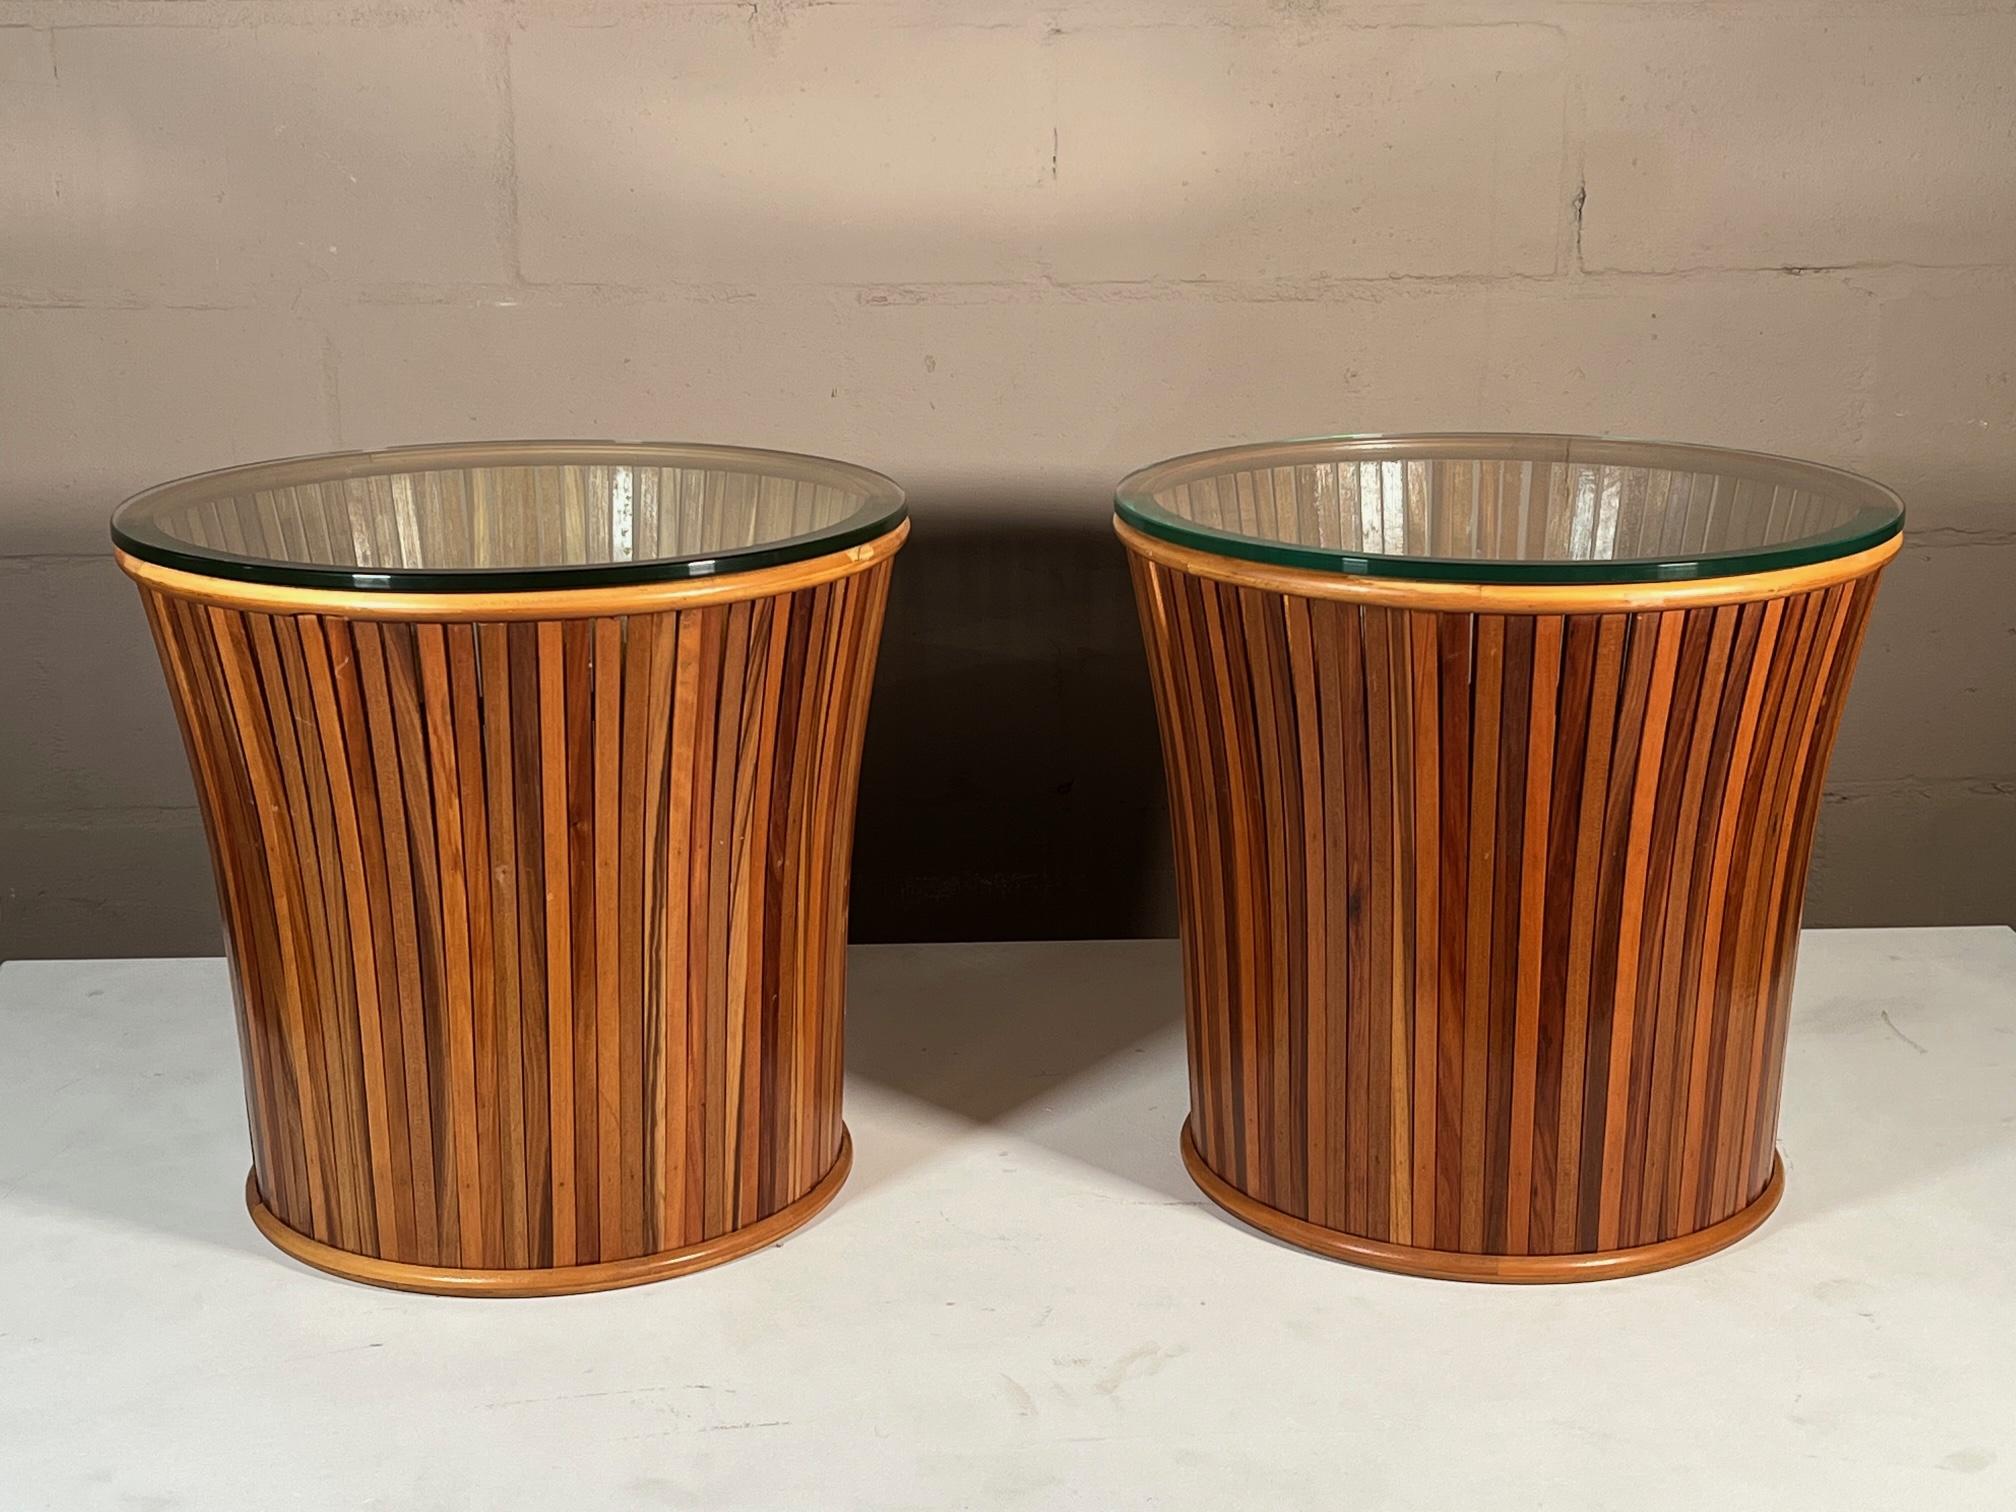 A pair of very unusual slat and reed side tables or pedestals with glass tops. Ca' 1970's, drum shaped, wider at the top.